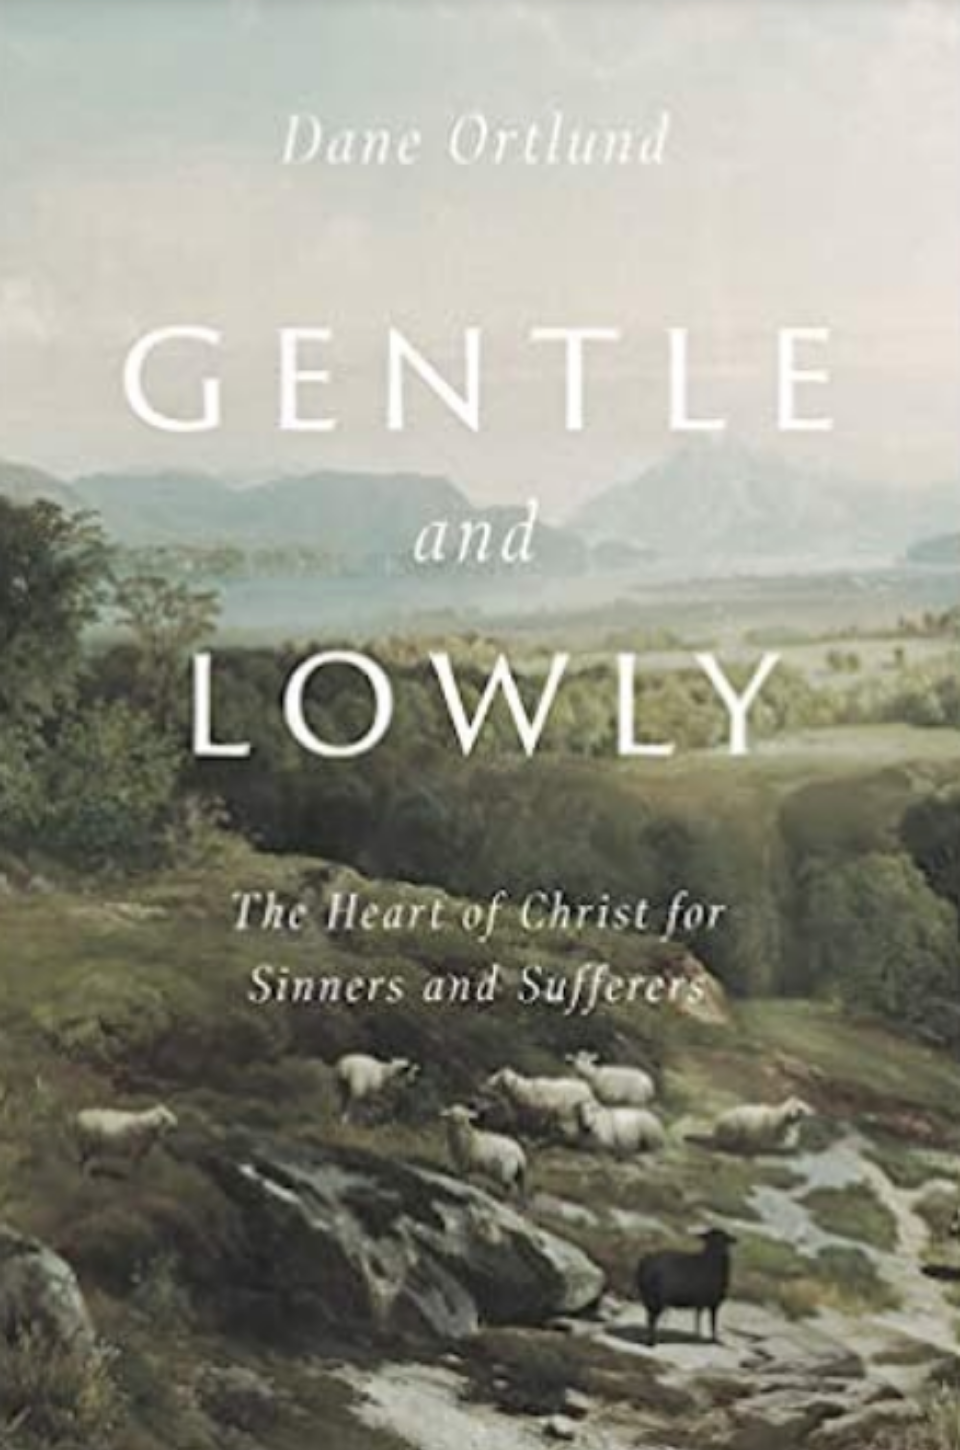 Congrats to Bonnie Kaiser who won Gentle and Lowly!